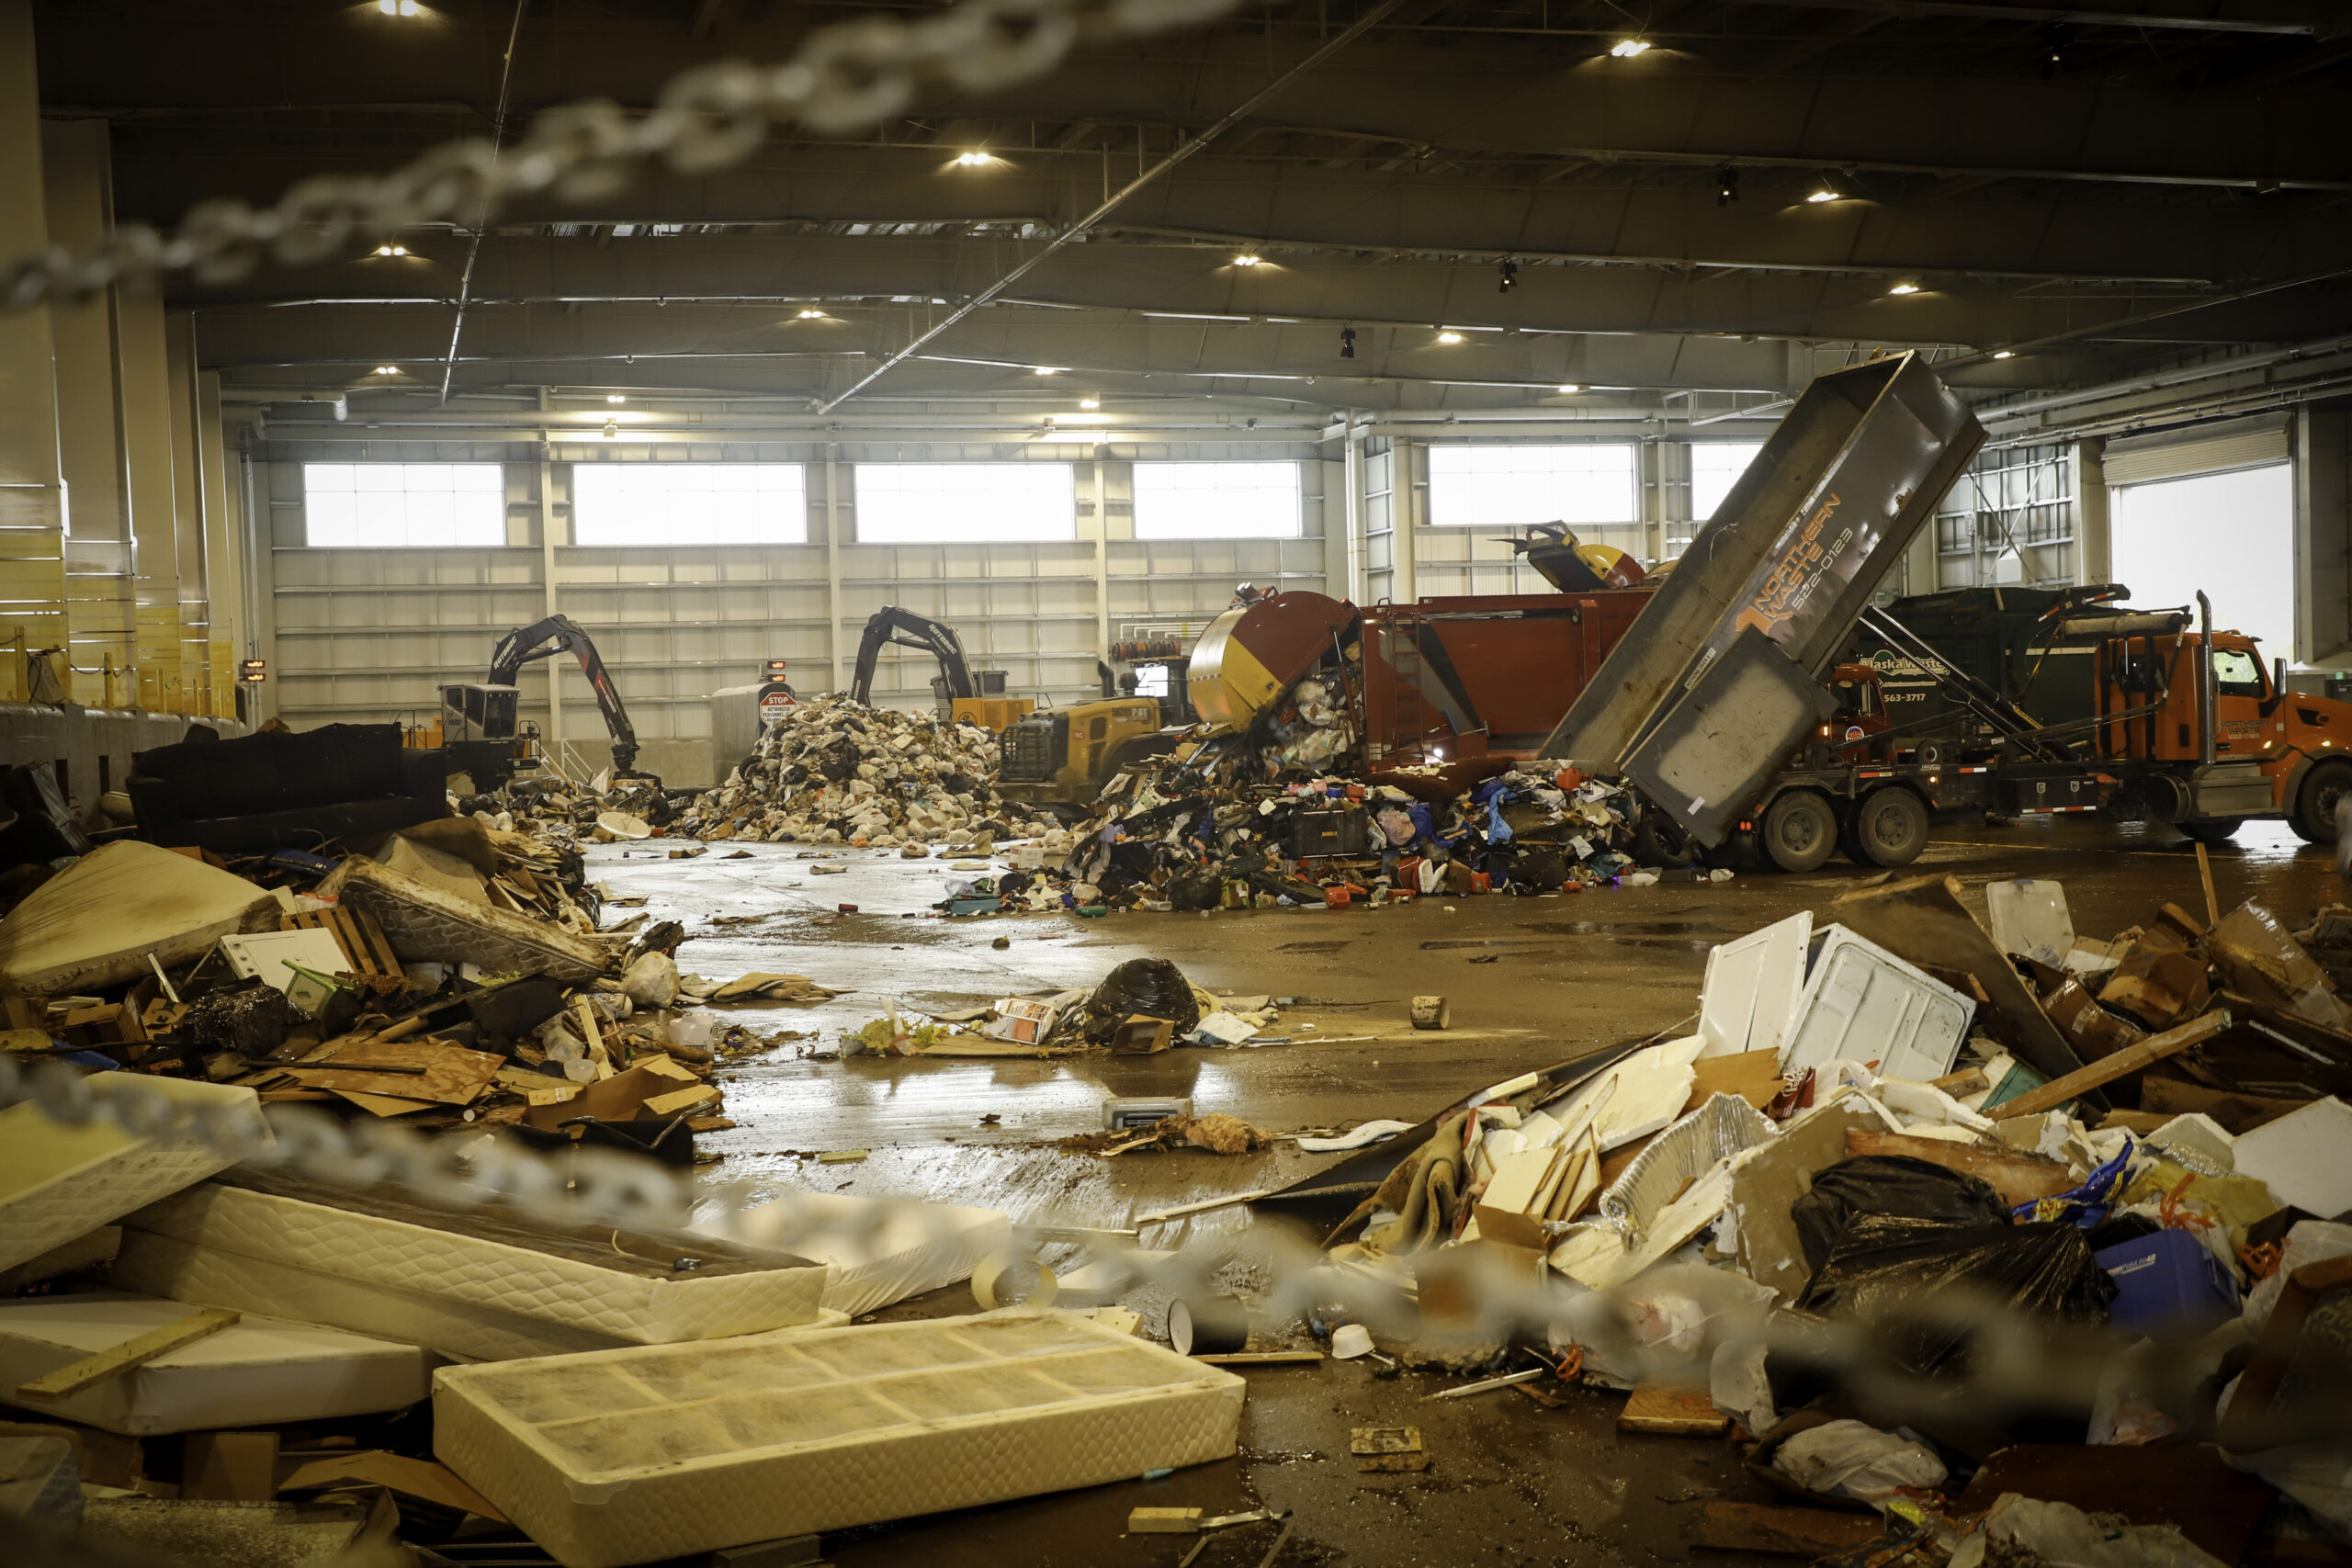 A tipping floor for waste from commercial companies and residential.